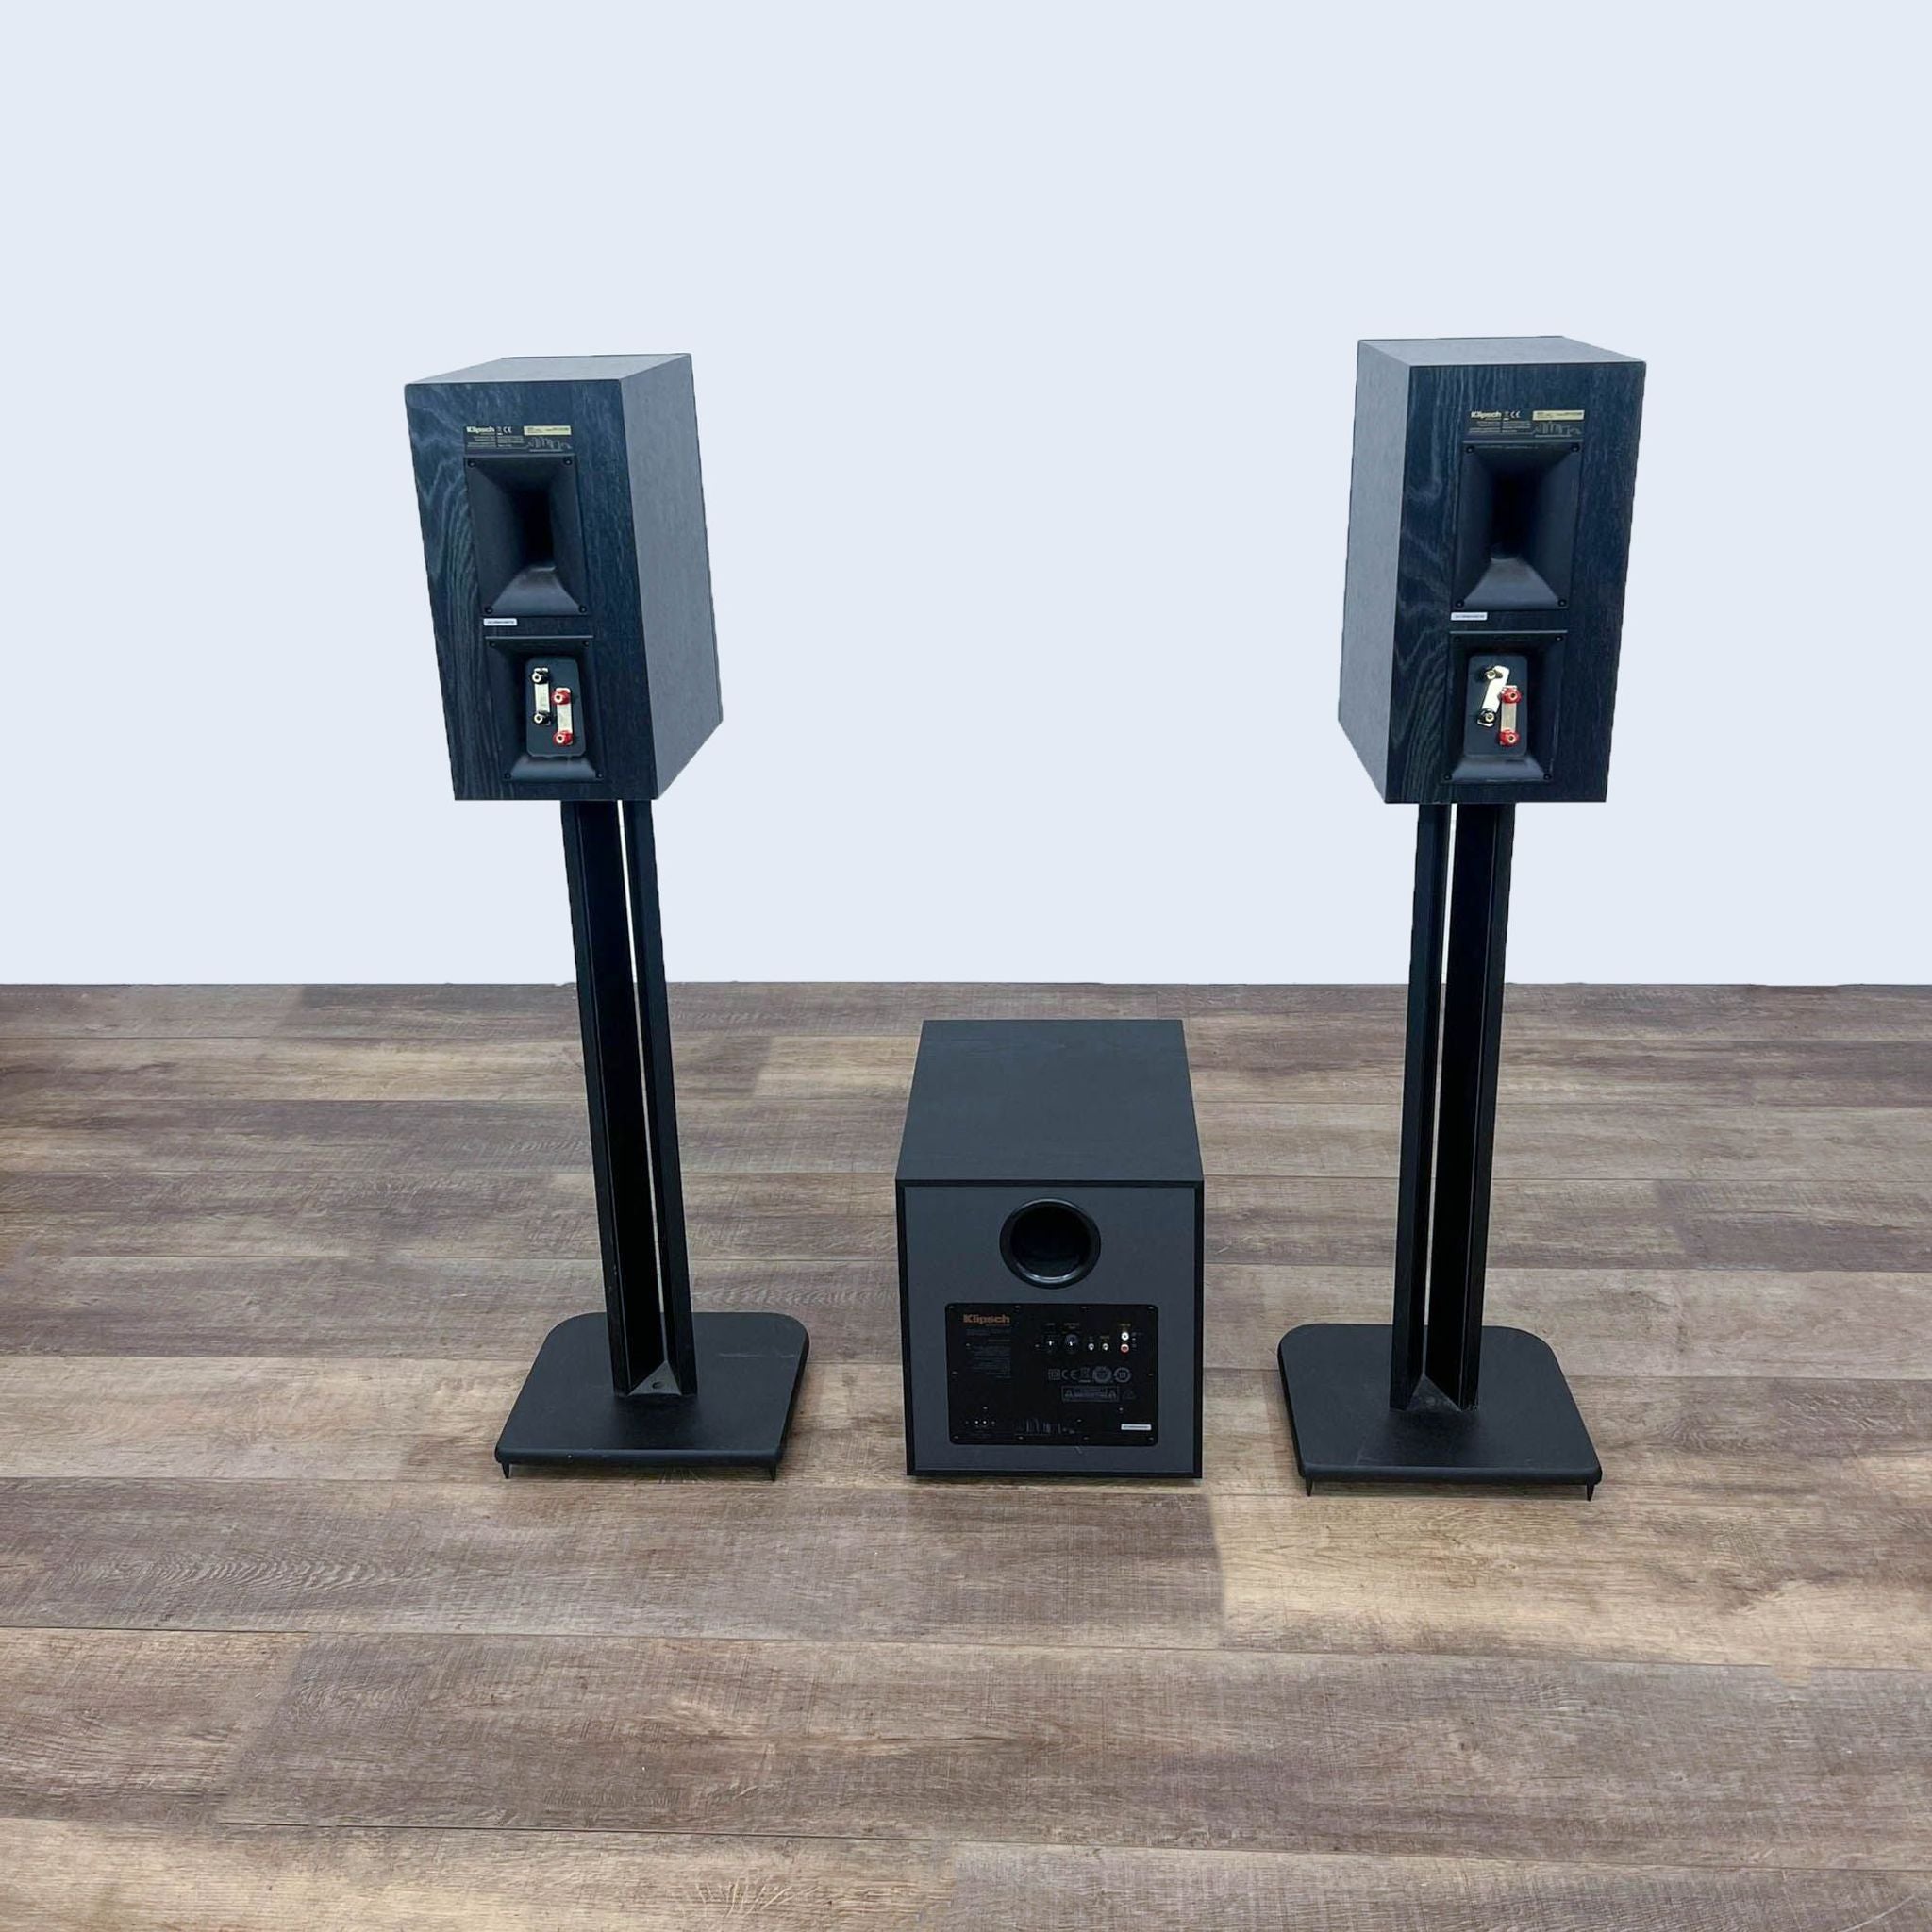 Alt text 1: Klipsch audio system with two tall black speakers on stands and a central subwoofer on a wood floor against a gray background.